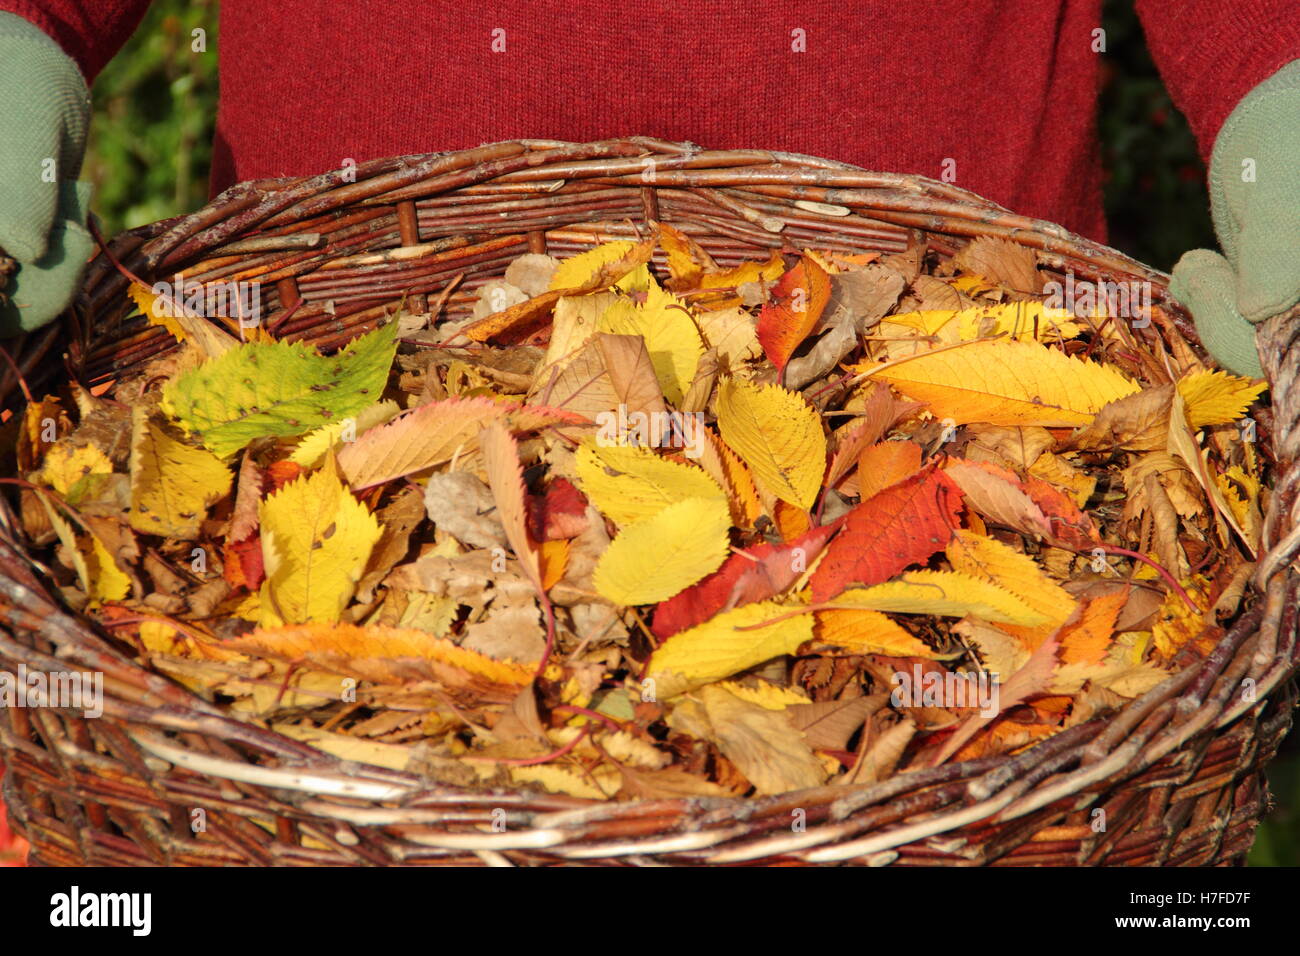 Fallen autumn leaves (ornamental cherry - prunus) are tidied by a male gardener from a suburban garden into a basket on a bright October day, UK Stock Photo